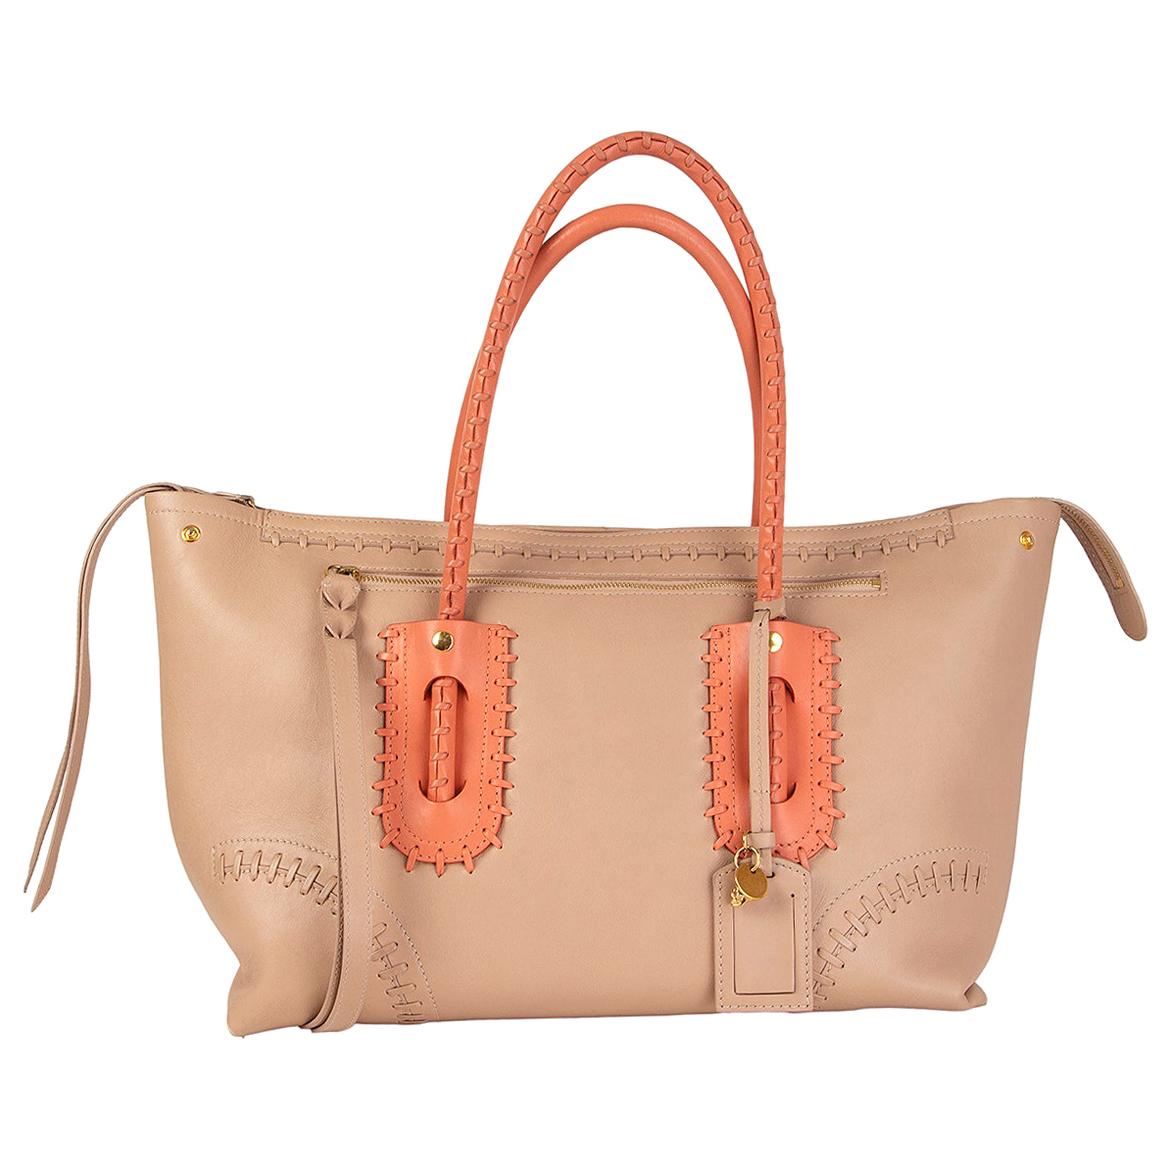 ALEXANDER MCQUEEN nude & coral leather FOLK WHIPSTITCH MEDIUM Tote Bag